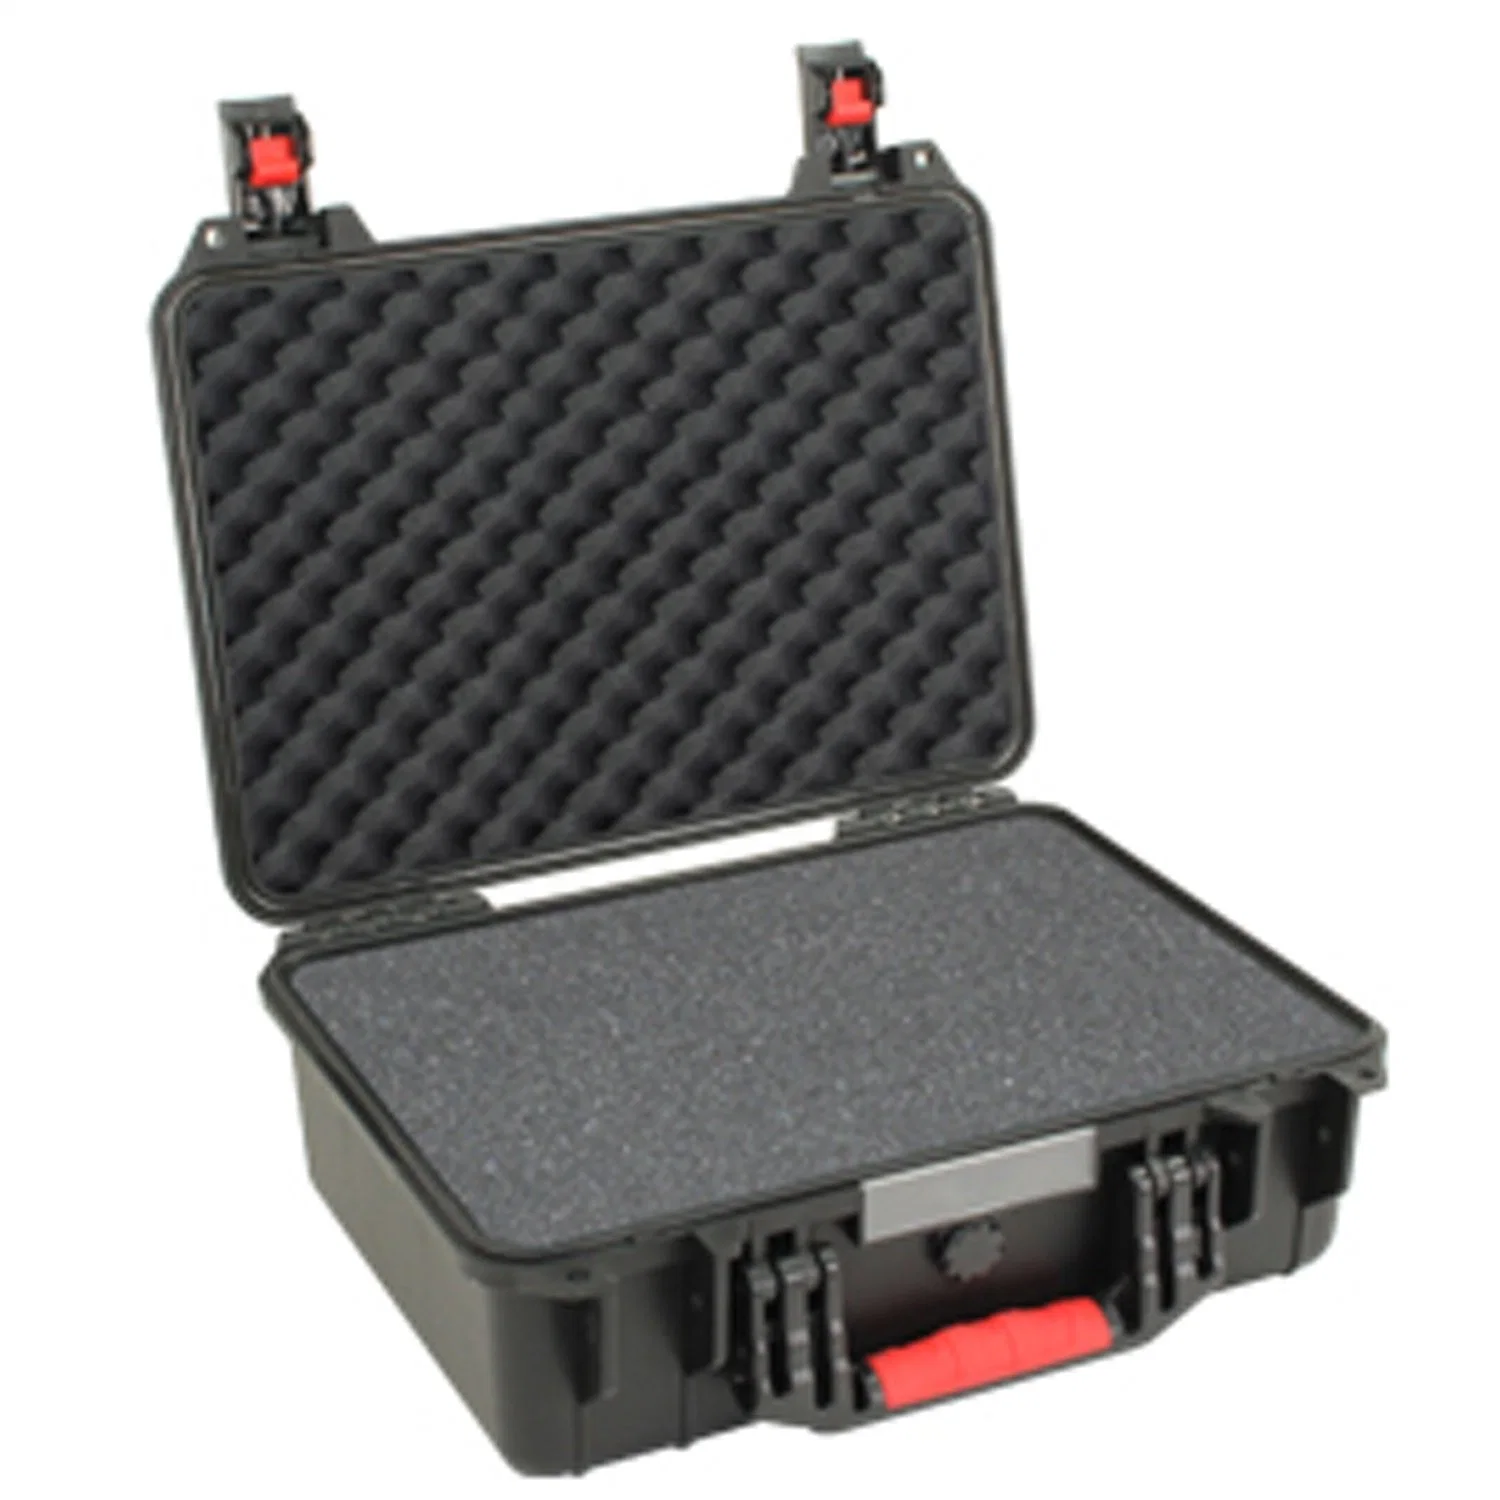 Ningbo Factory IP67 Safety Waterproof Shockproof Rugged Hard Plastic Equipment Instrument Carry Tool Protective Case